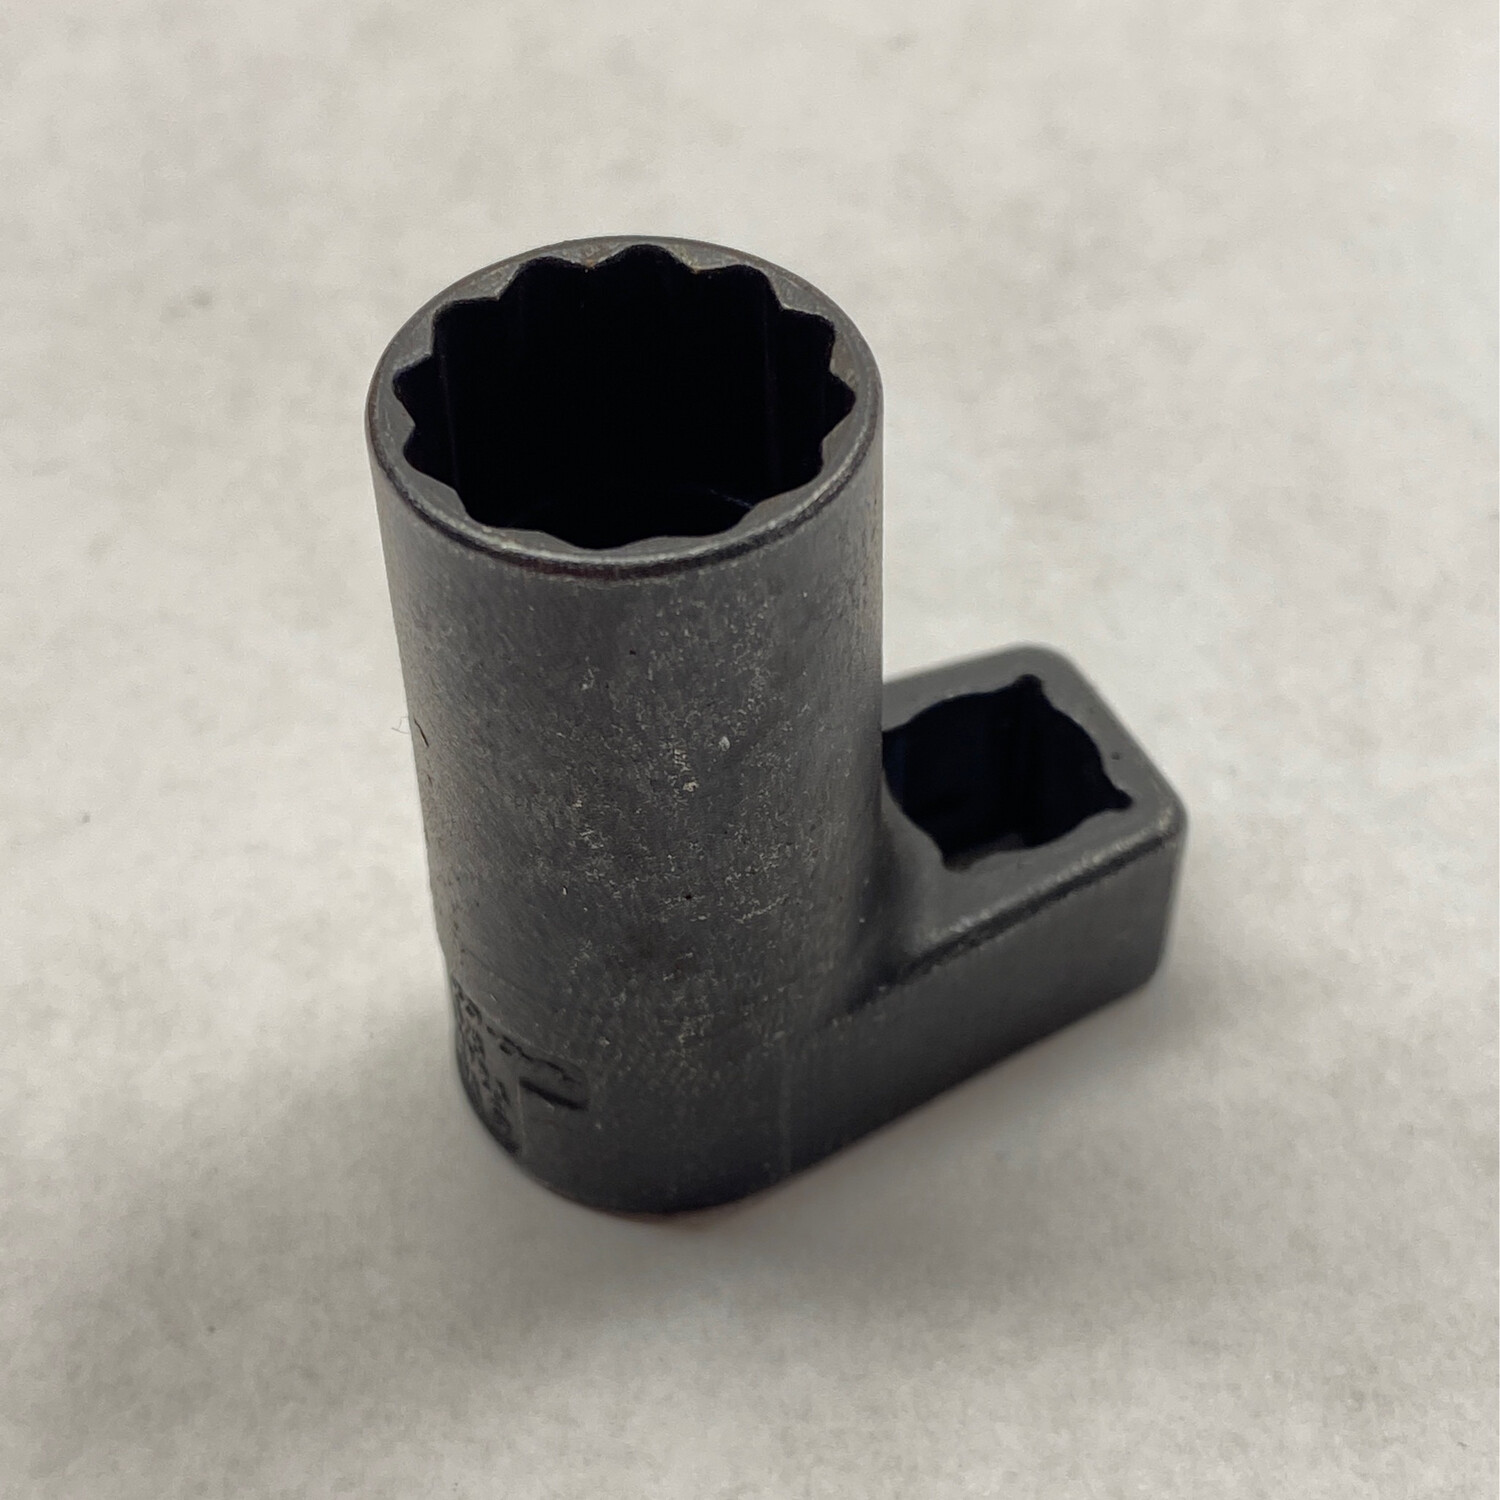 what is a flank drive socket?